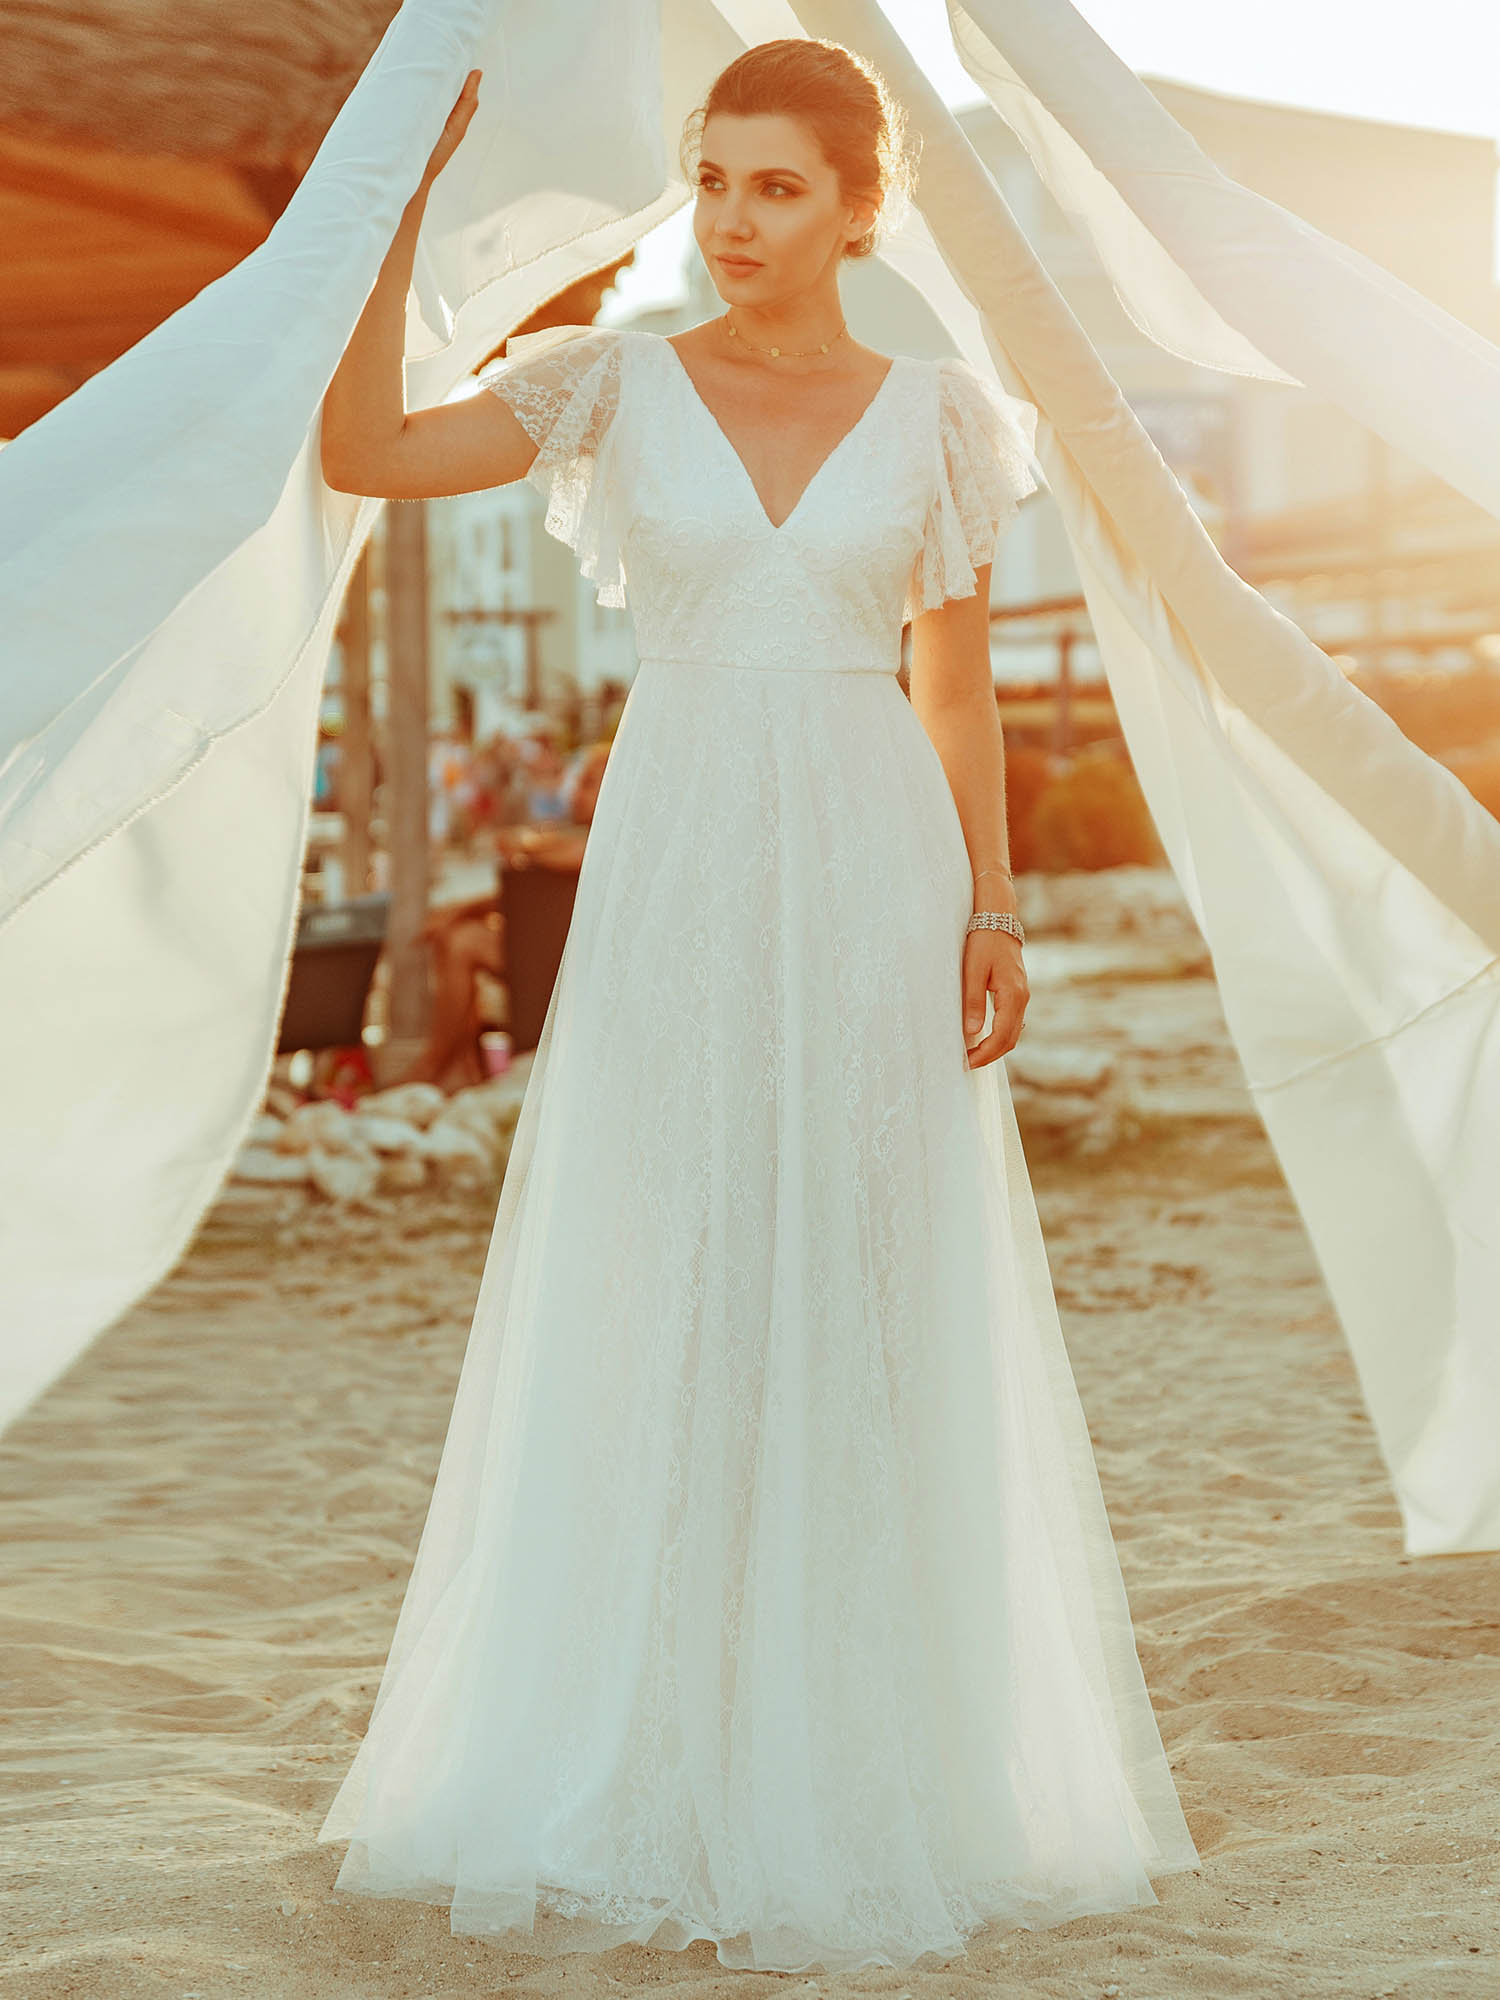 What Dresses Look Best on Outdoor Weddings on Ever Pretty?